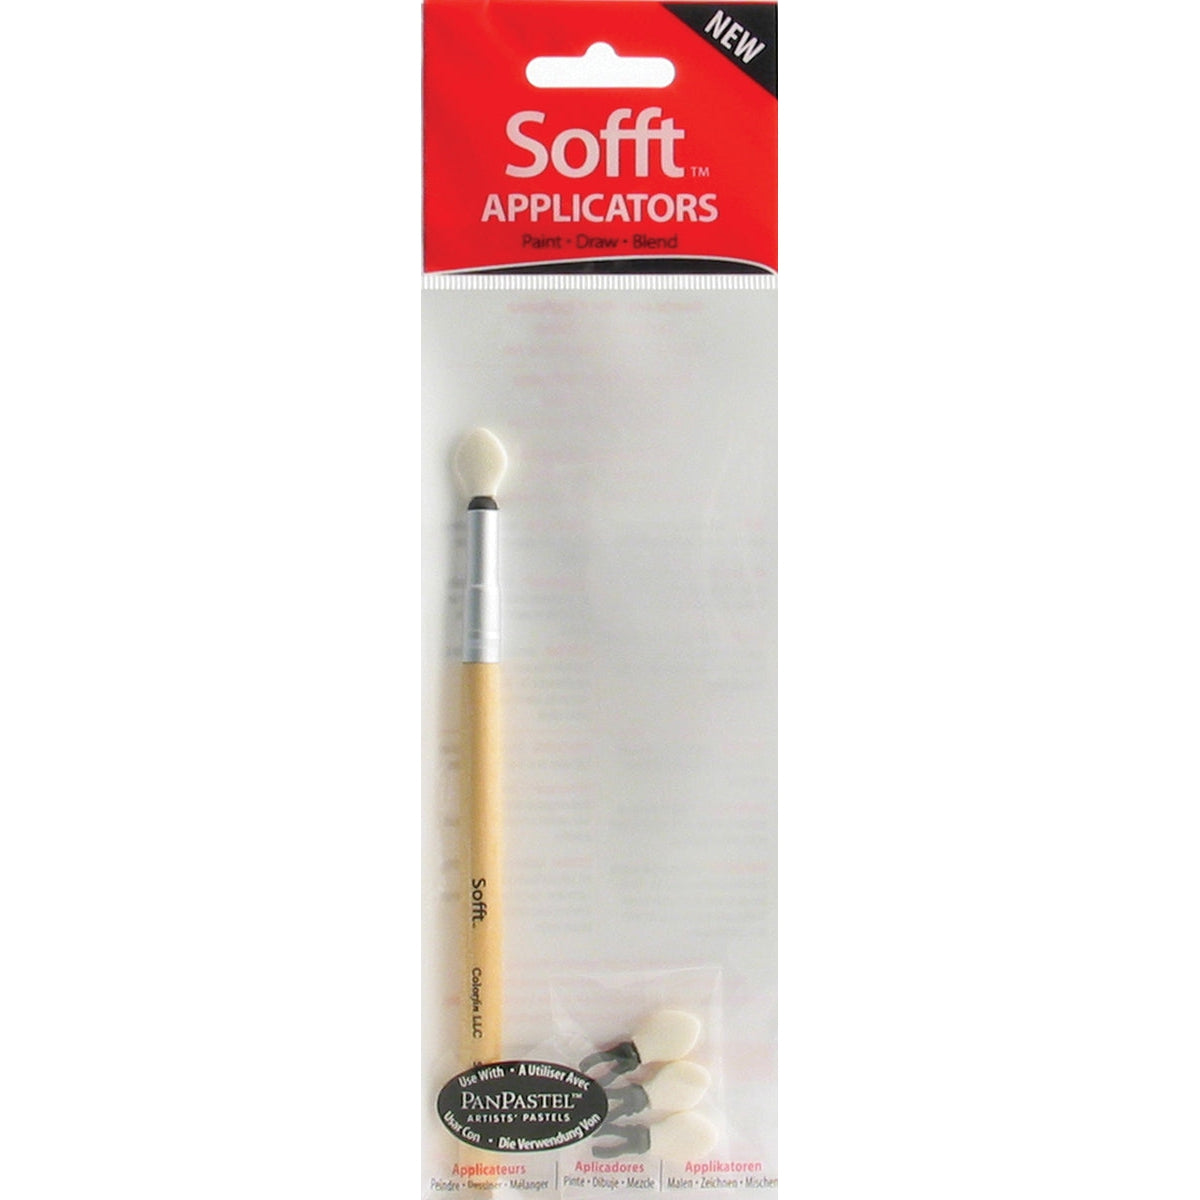 PanPastel Sofft 1 Applicator With 4 Replaceable Heads